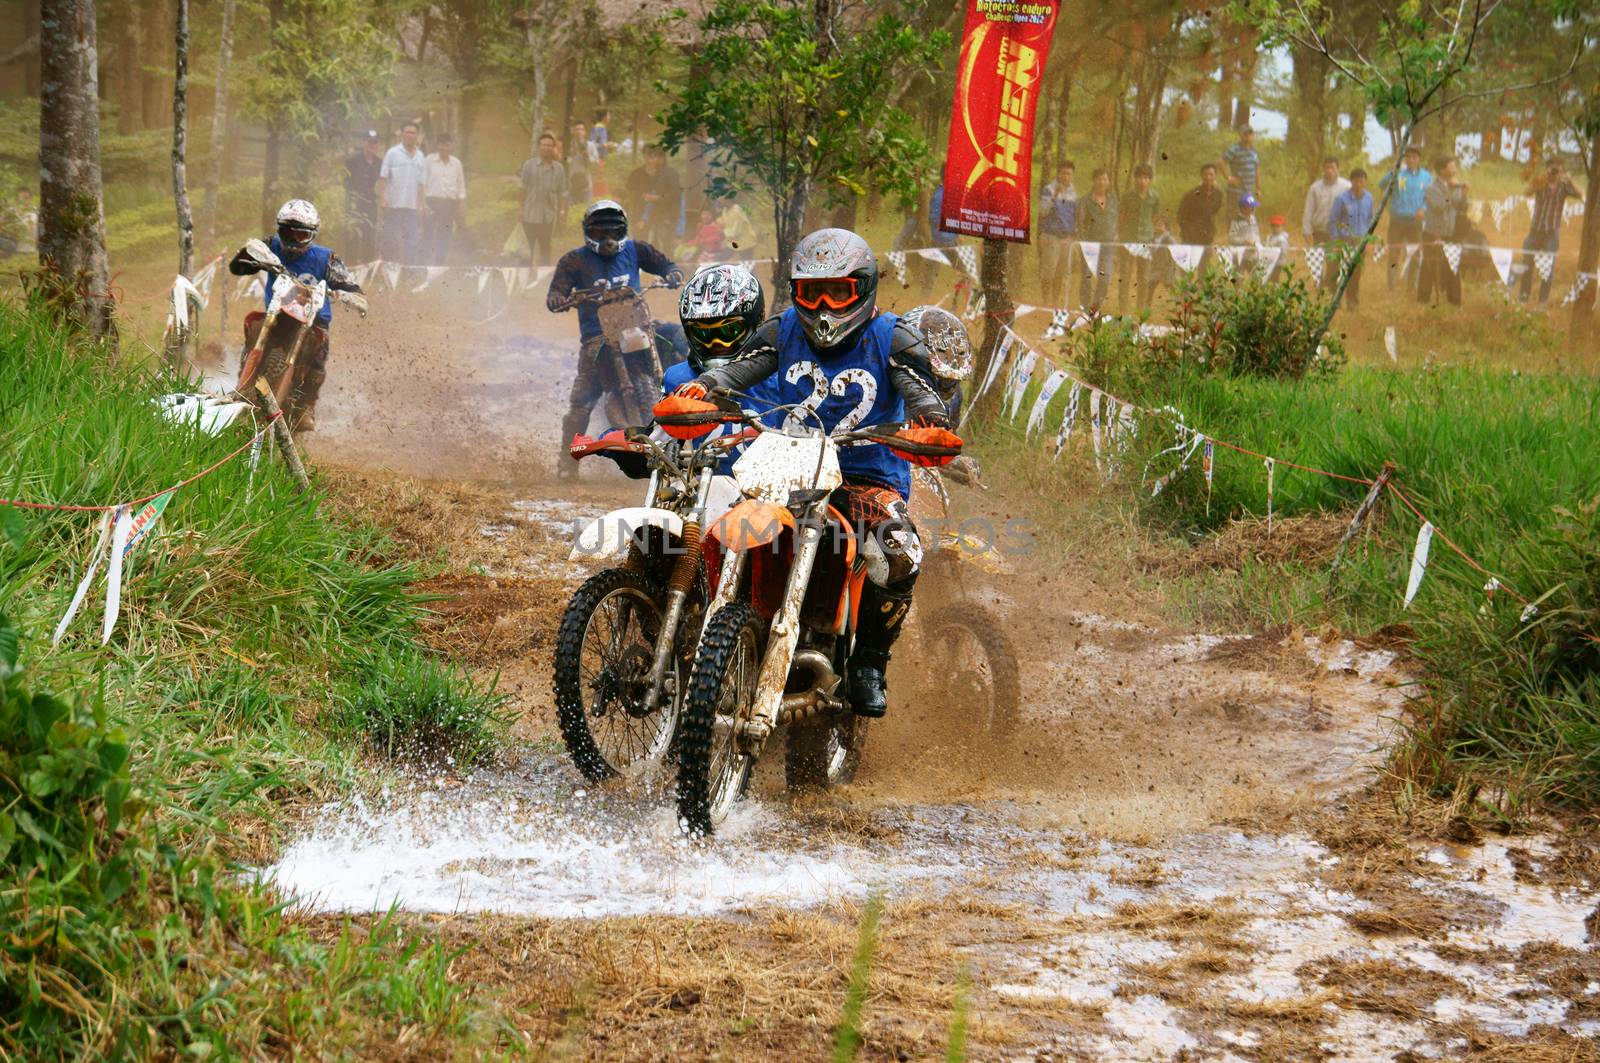 BAO LOC, VIET NAM- DECEMBER 23:  Racer in activity at motorcycle race hole on Bao Loc, Viet Nam, they try to across a marshy stretch of road with violent competition in December 23, 2012               